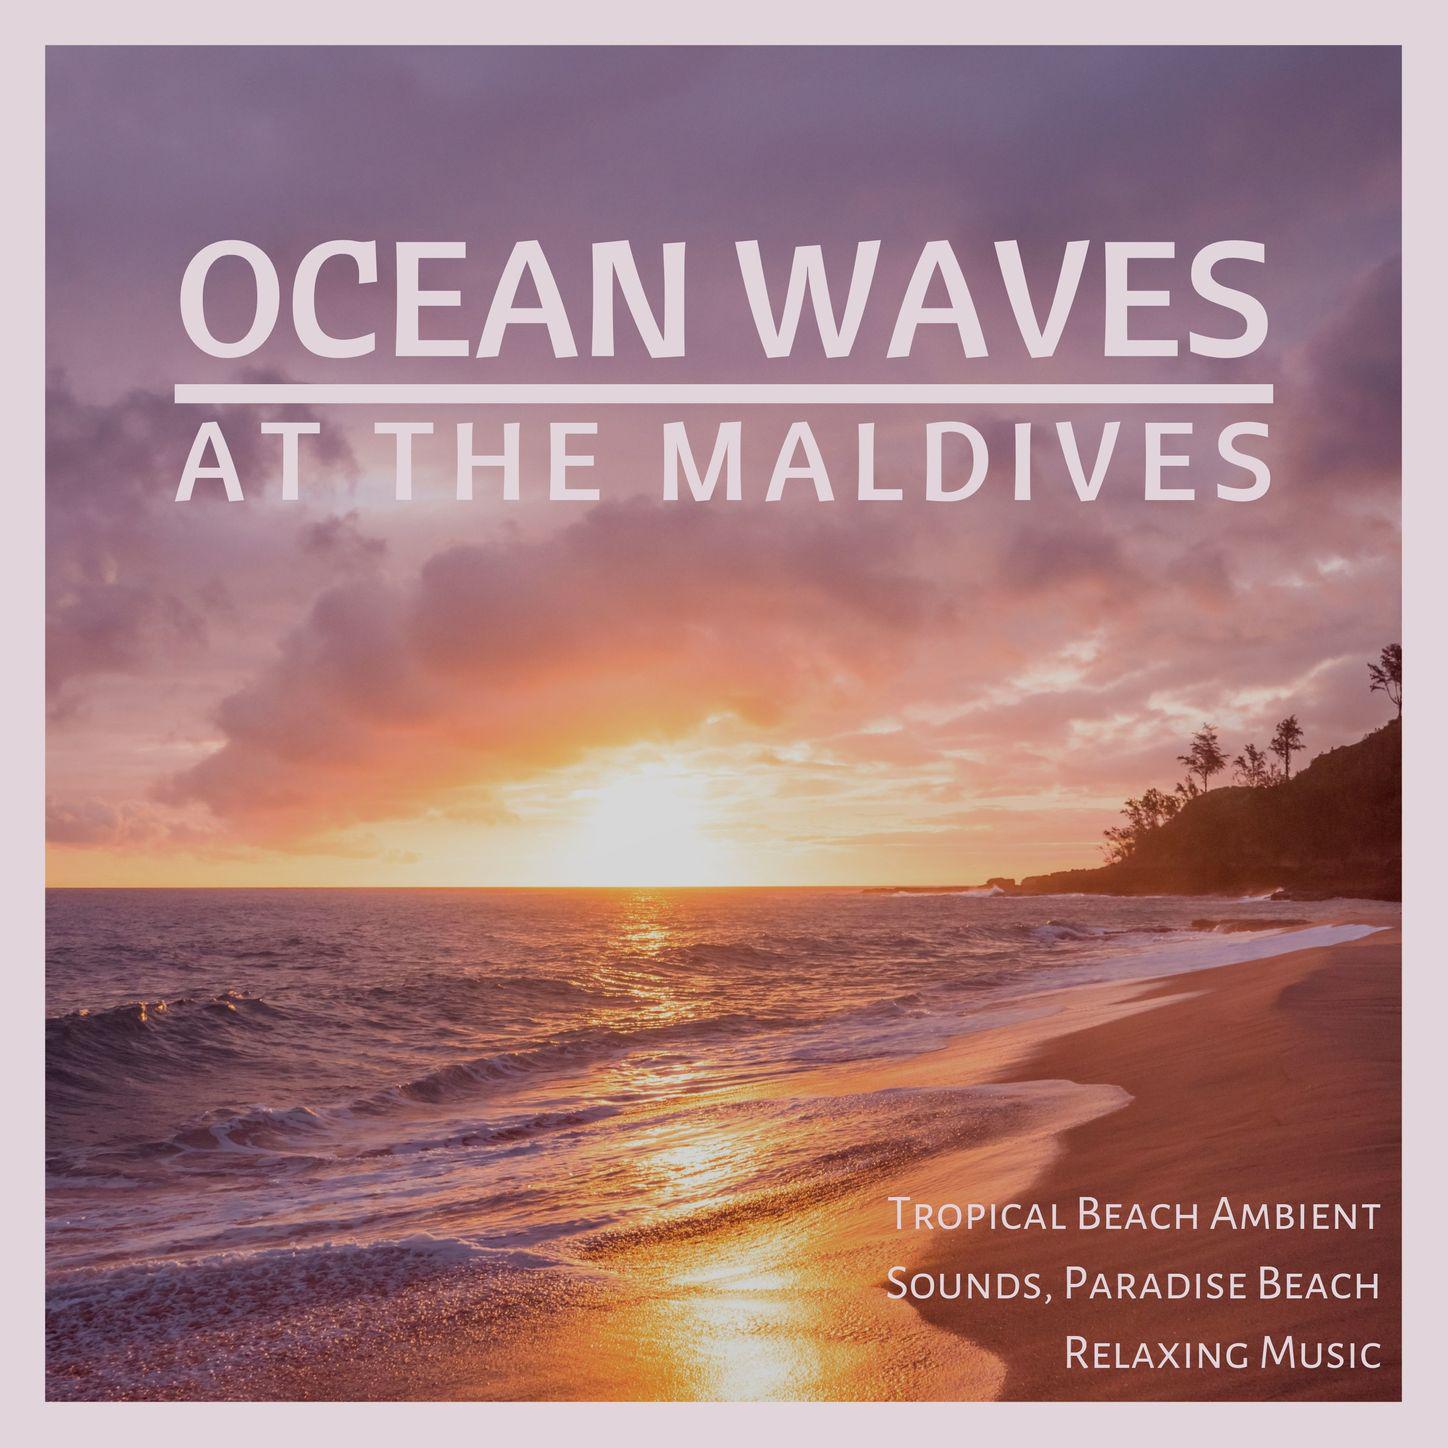 Ocean Waves at the Maldives - Tropical Beach Ambient Sounds, Paradise Beach Relaxing Music